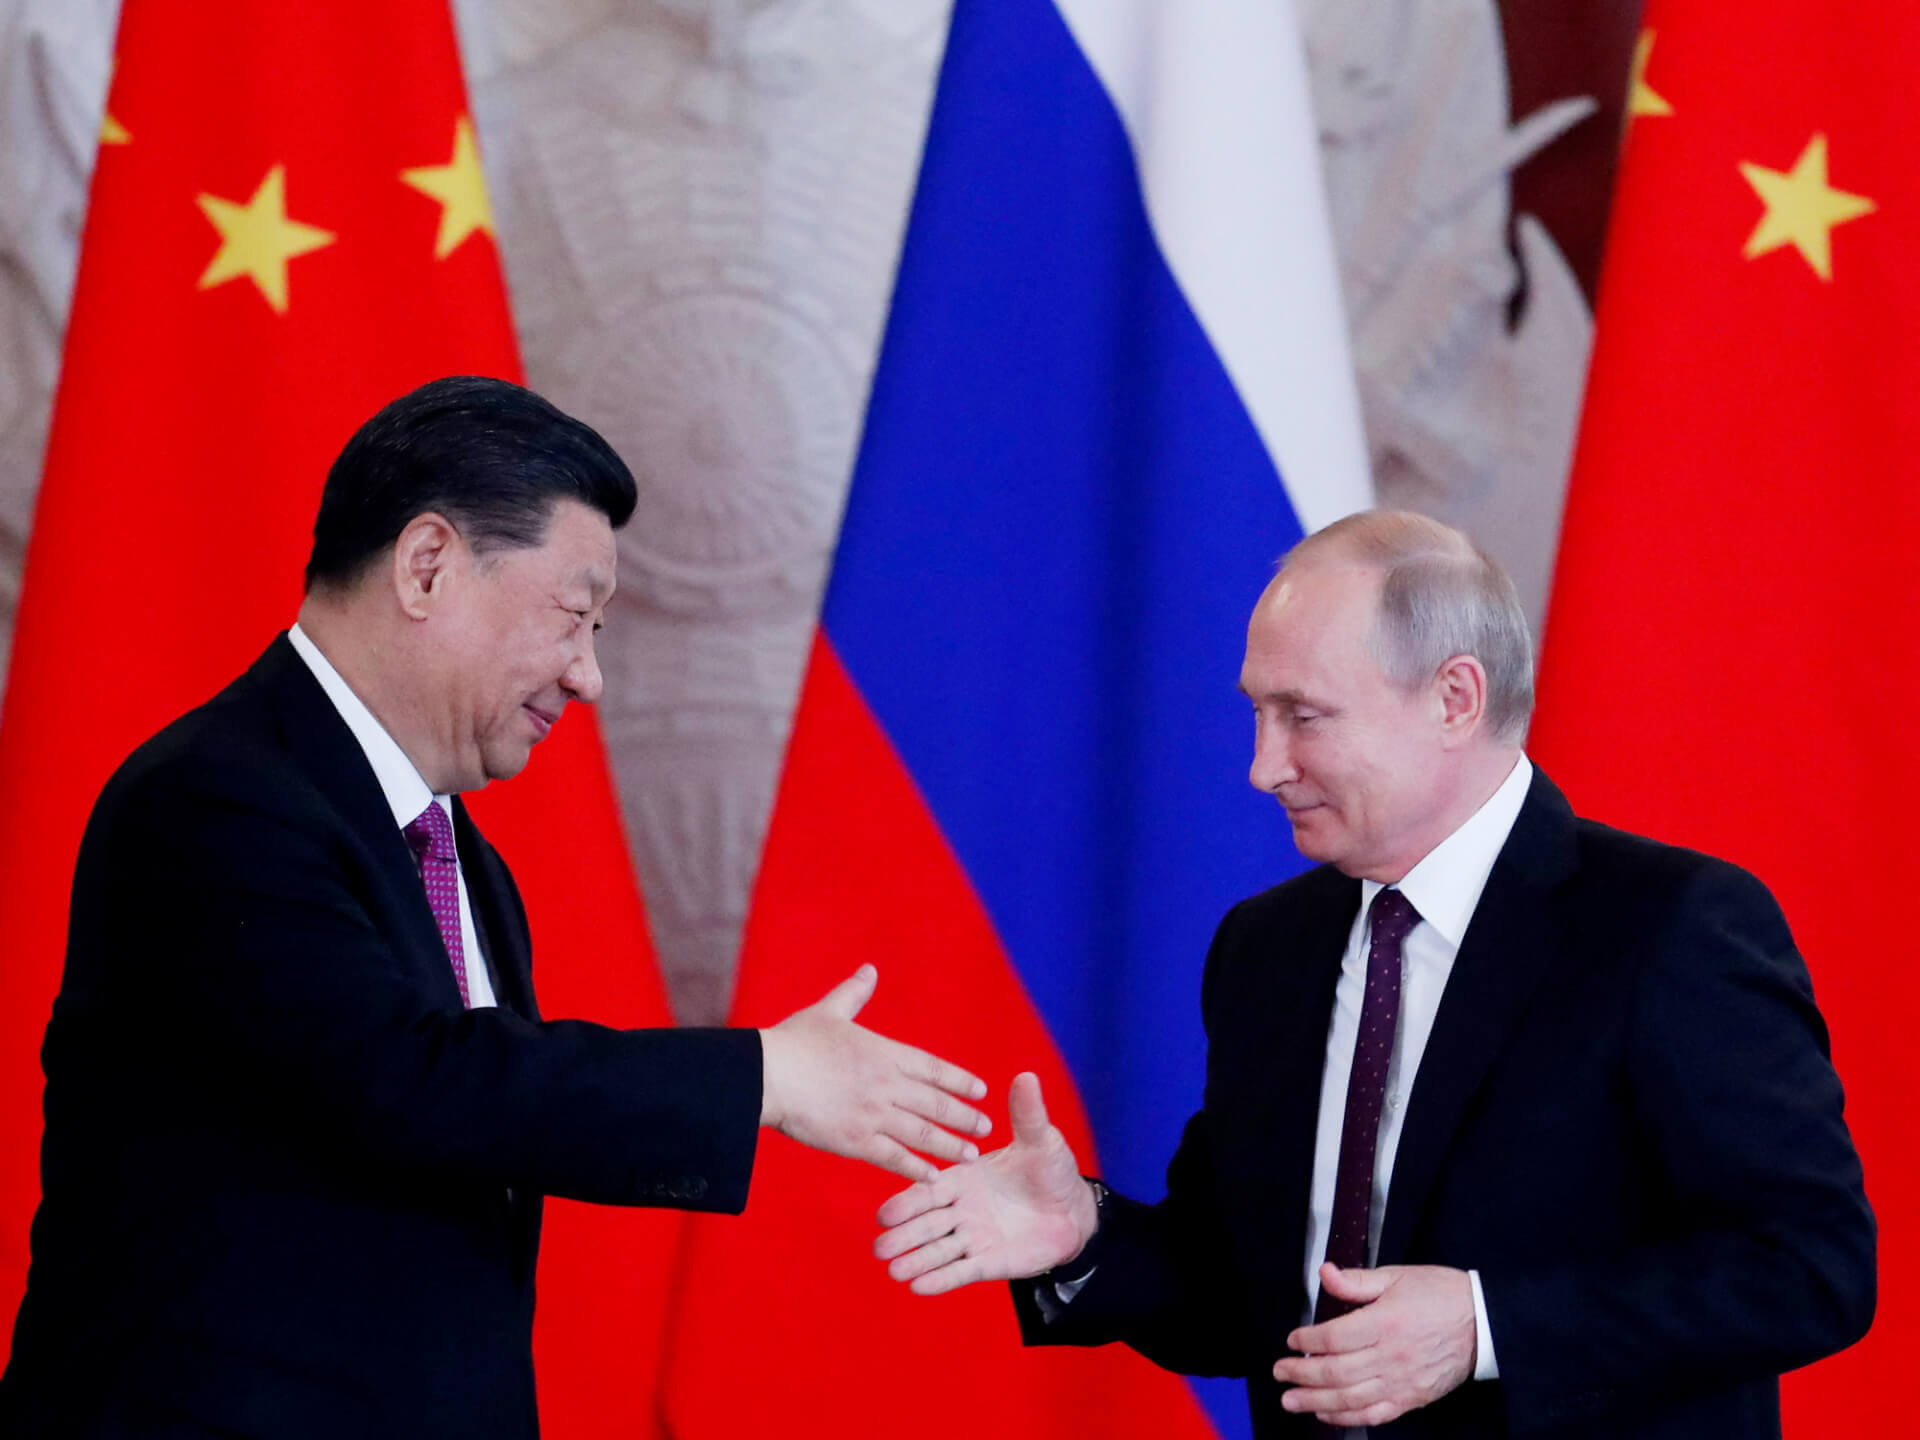 Xi Hails China-Russia Relationship Ahead of Meeting With Putin in Moscow